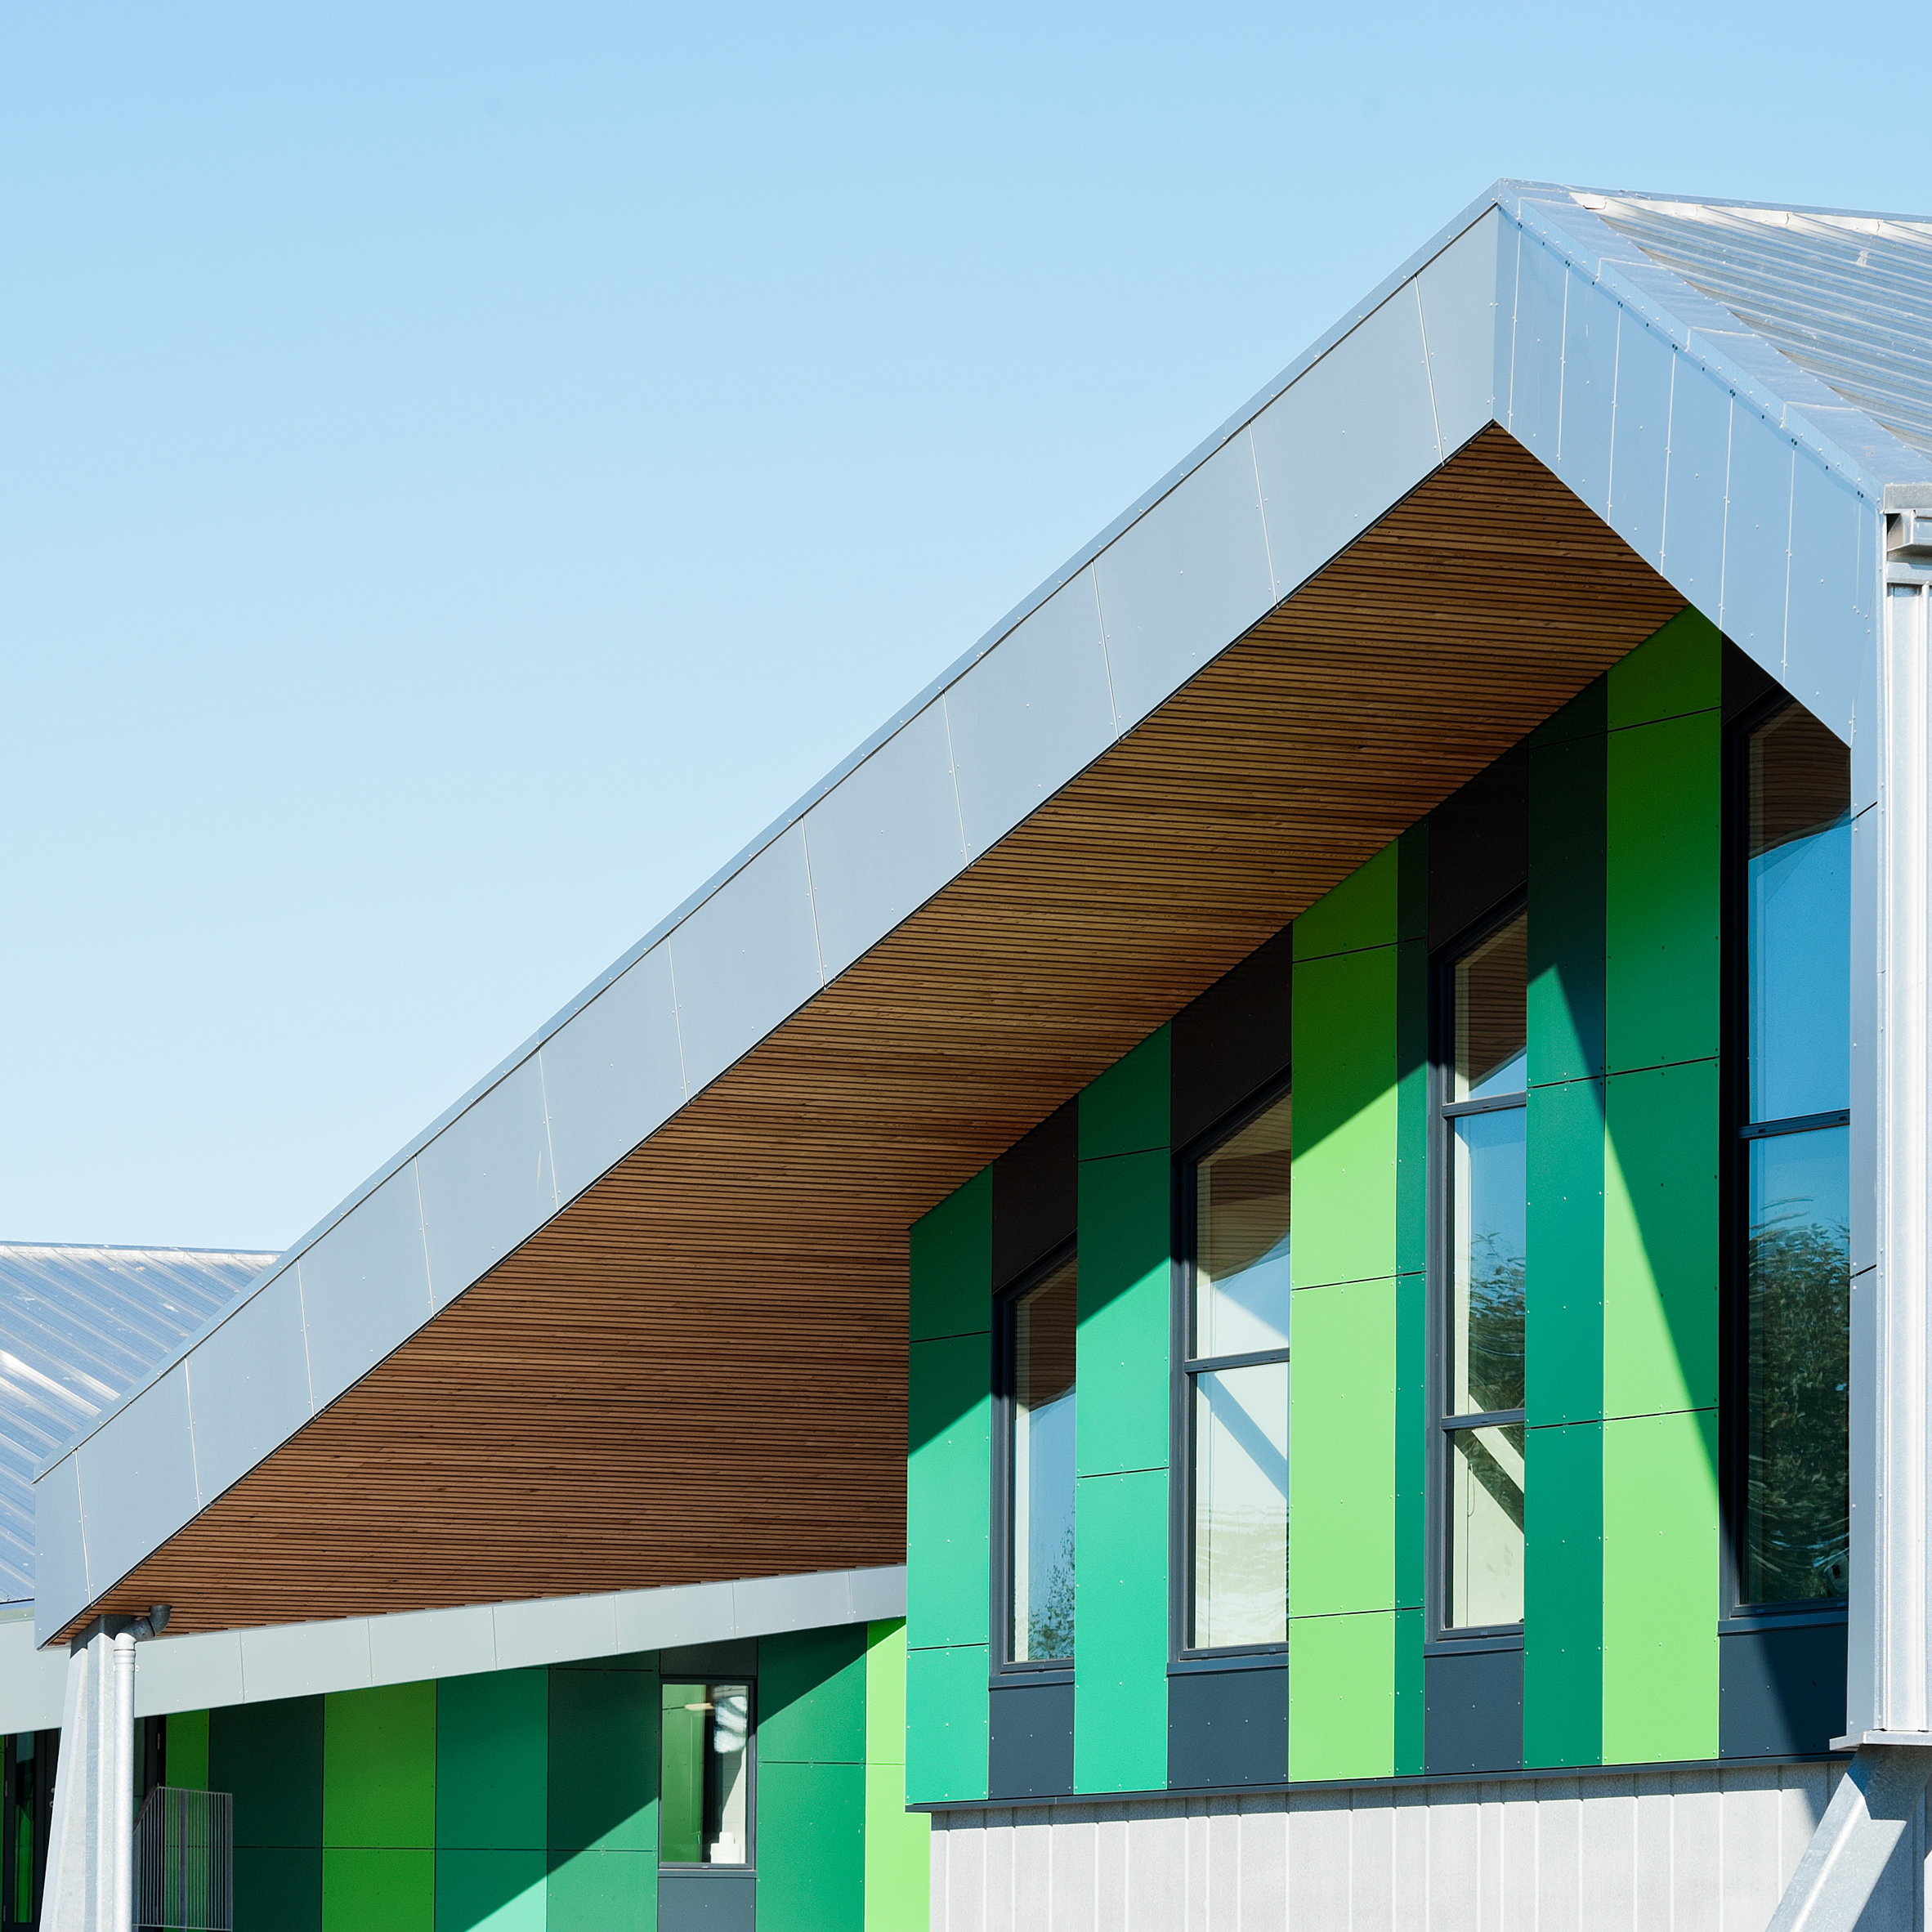 CEBRA completes Danish school with jagged roofs and stripy walls-0